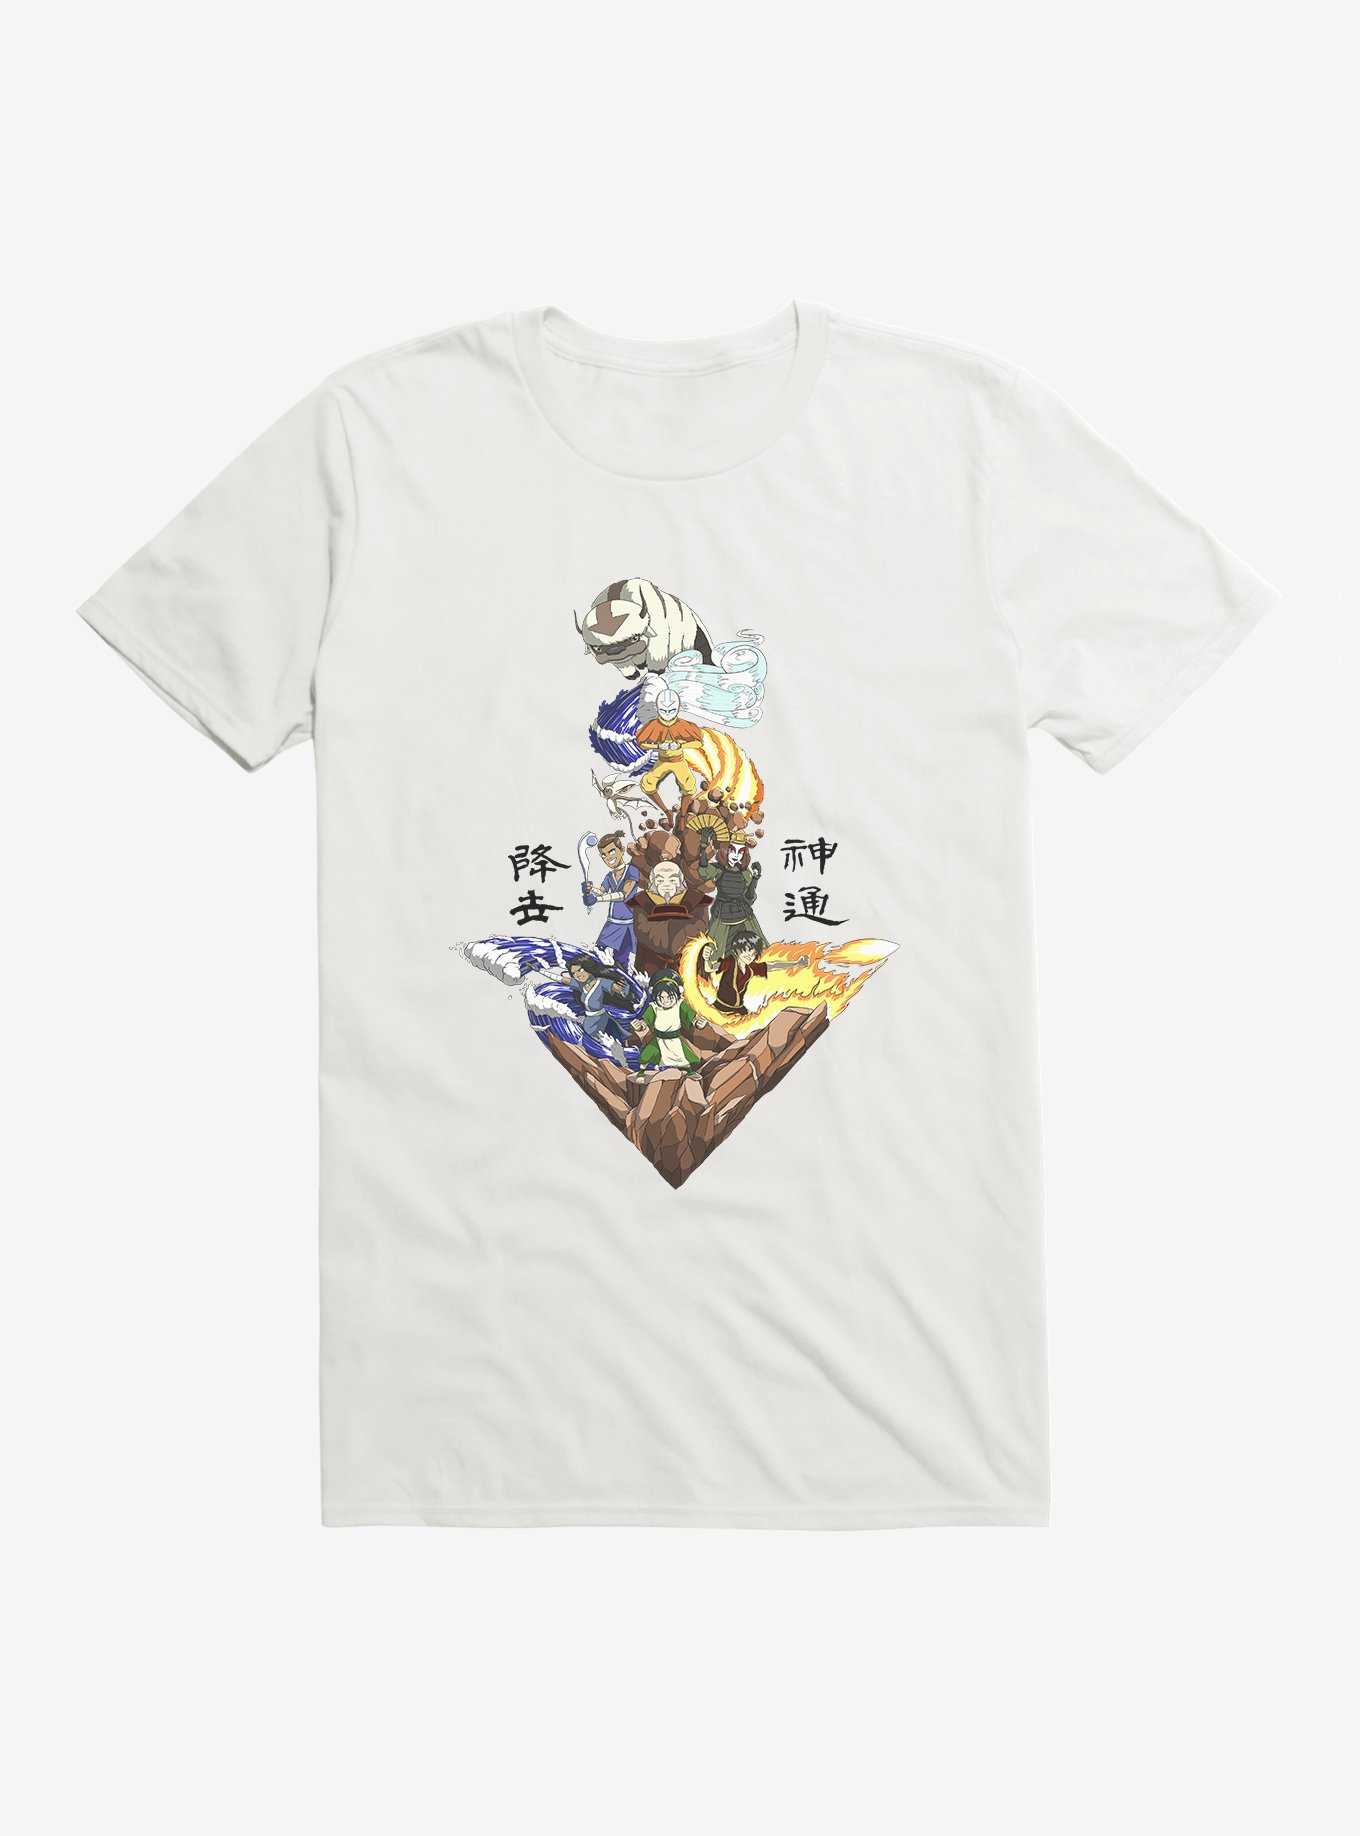 Avatar: The Last Airbender The Arrow T-Shirt, WHITE, hi-res